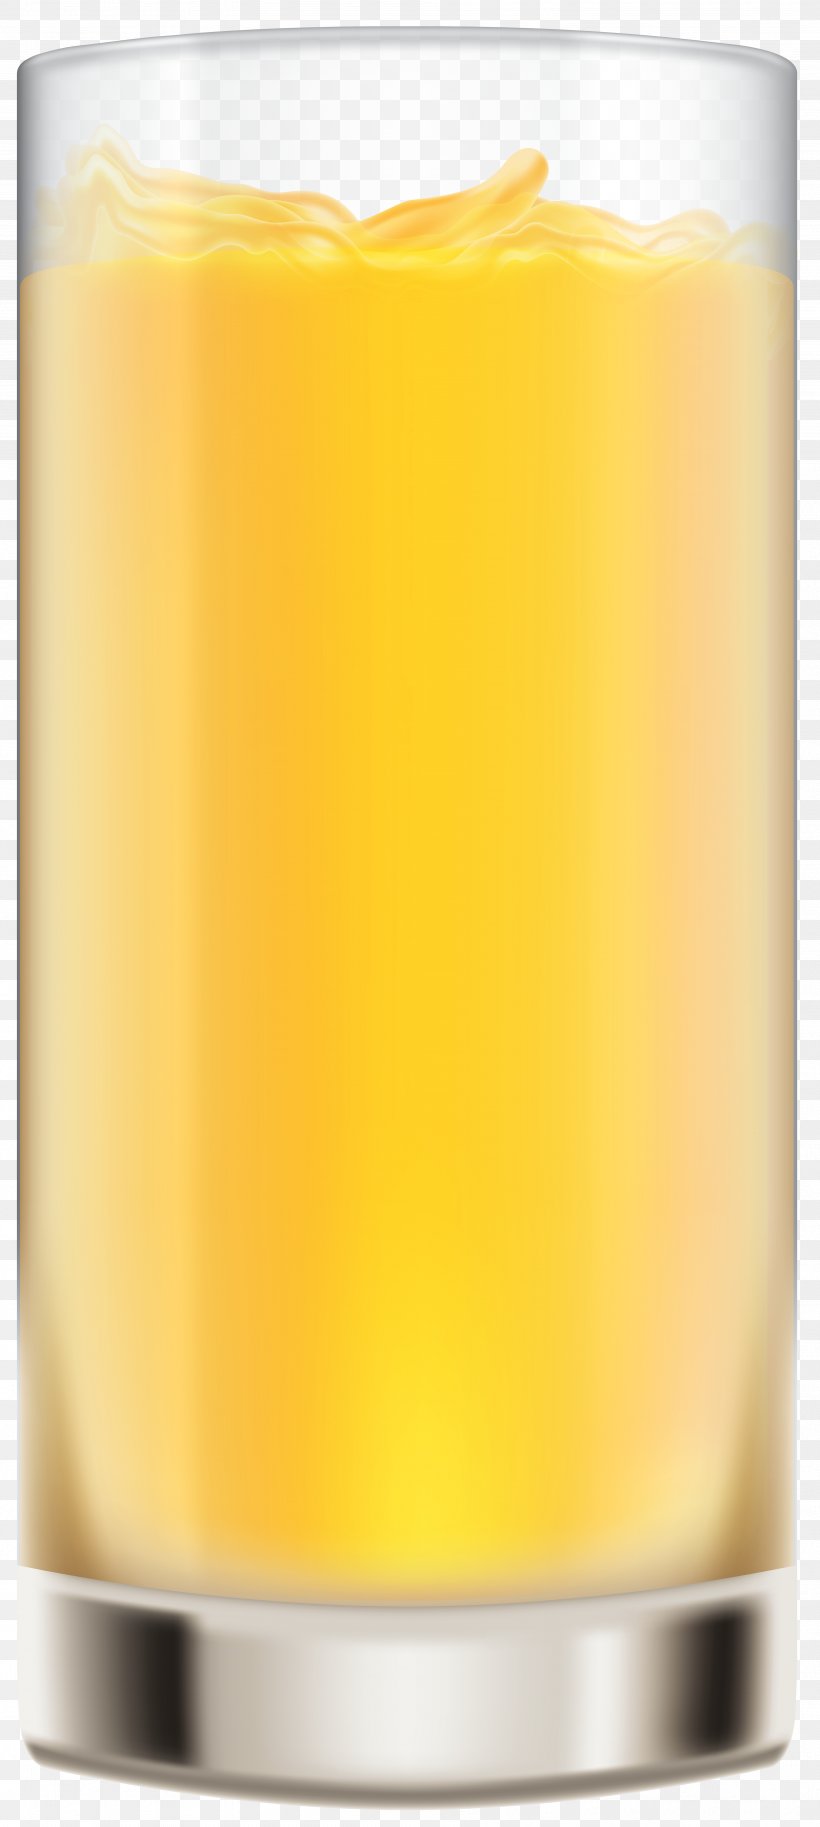 Orange Juice Flameless Candles Wax, PNG, 3589x8000px, Orange Juice, Candle, Flameless Candle, Flameless Candles, Harvey Wallbanger Download Free